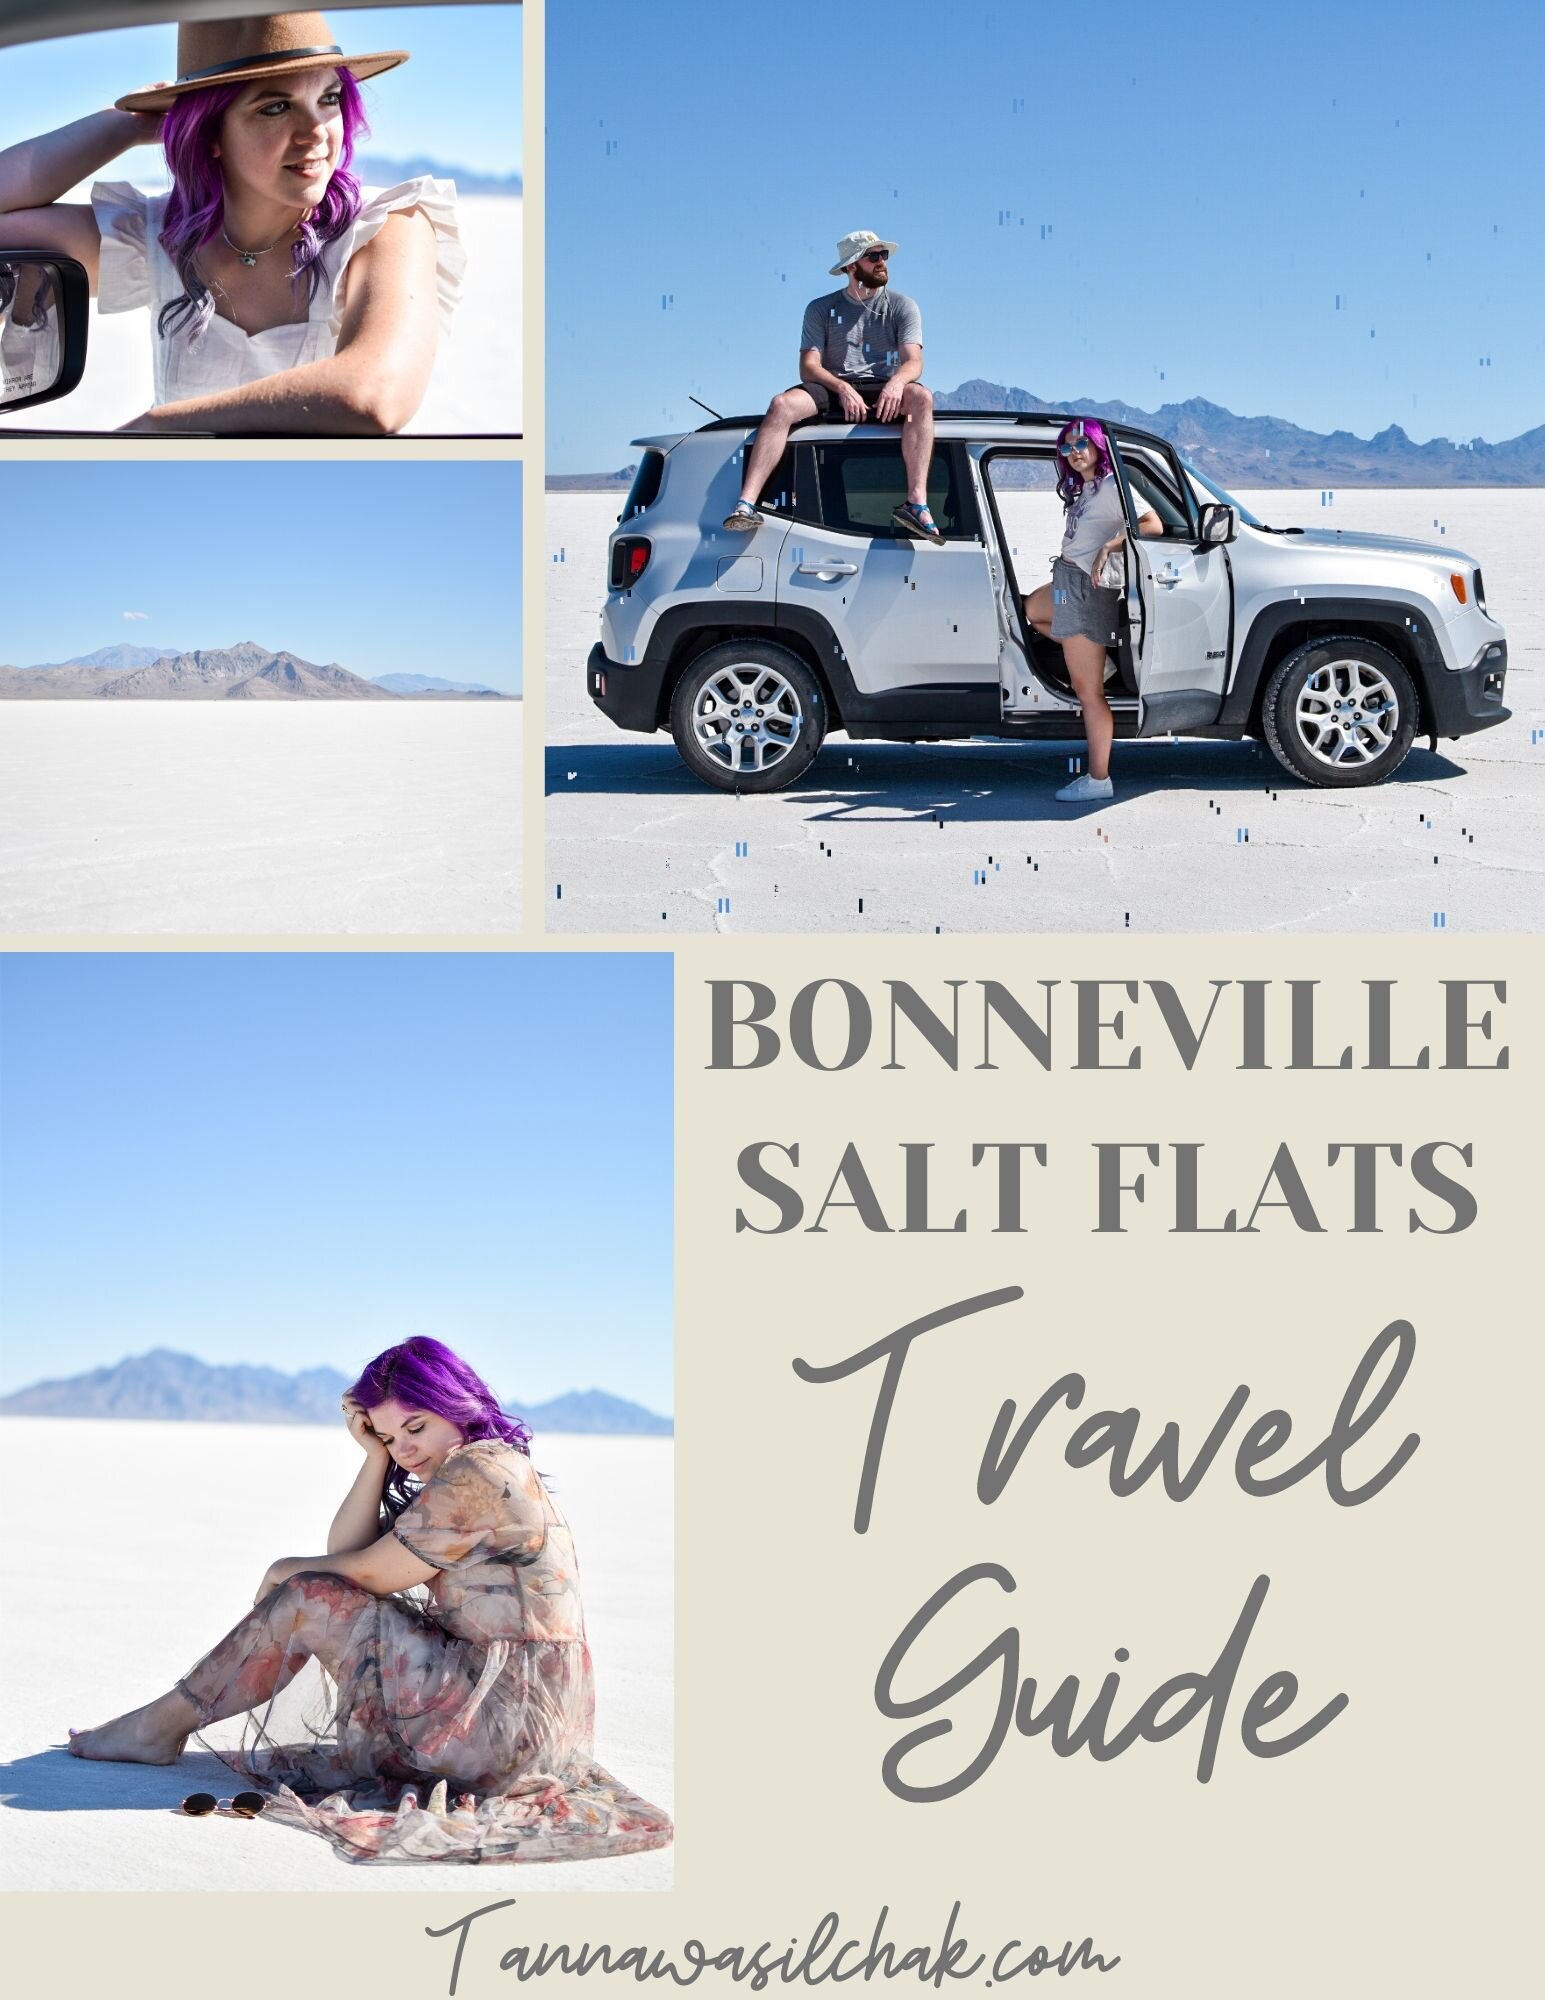 EVERYTHING YOU NEED TO KNOW ABOUT BONNEVILLE SALT FLATS (5).jpg